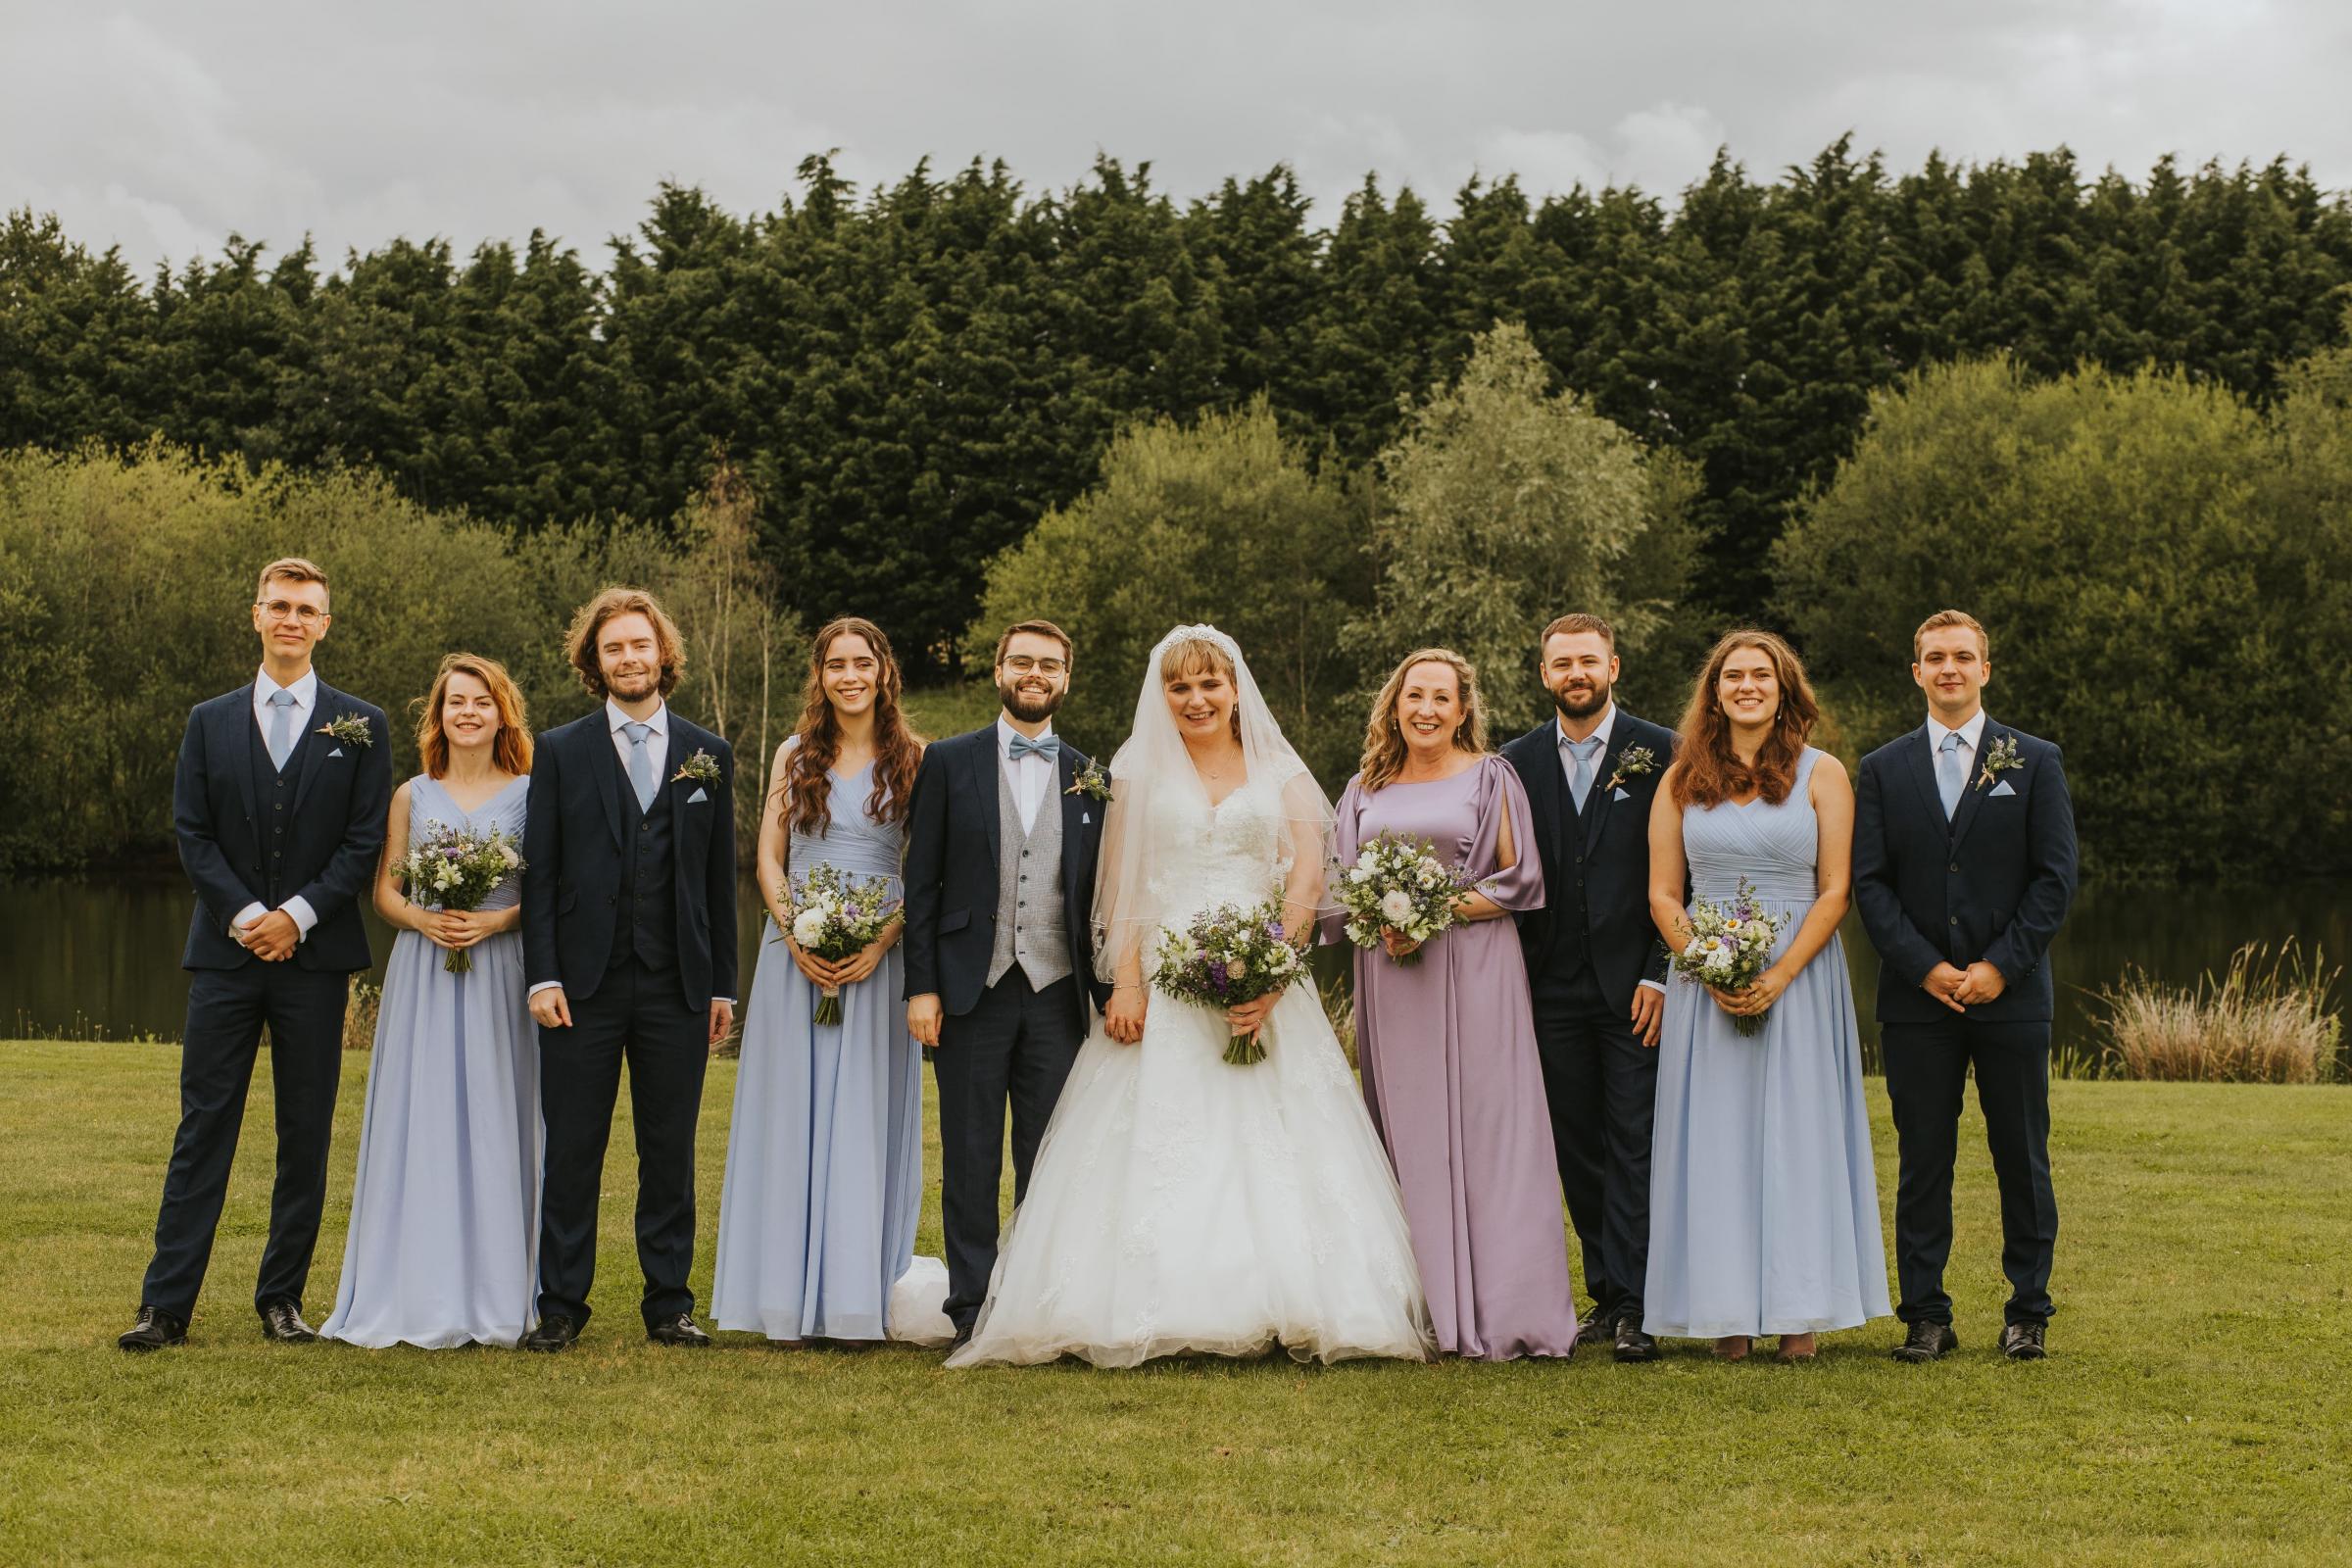 120 family and friends helped Alex and Caitlin celebrate their special day